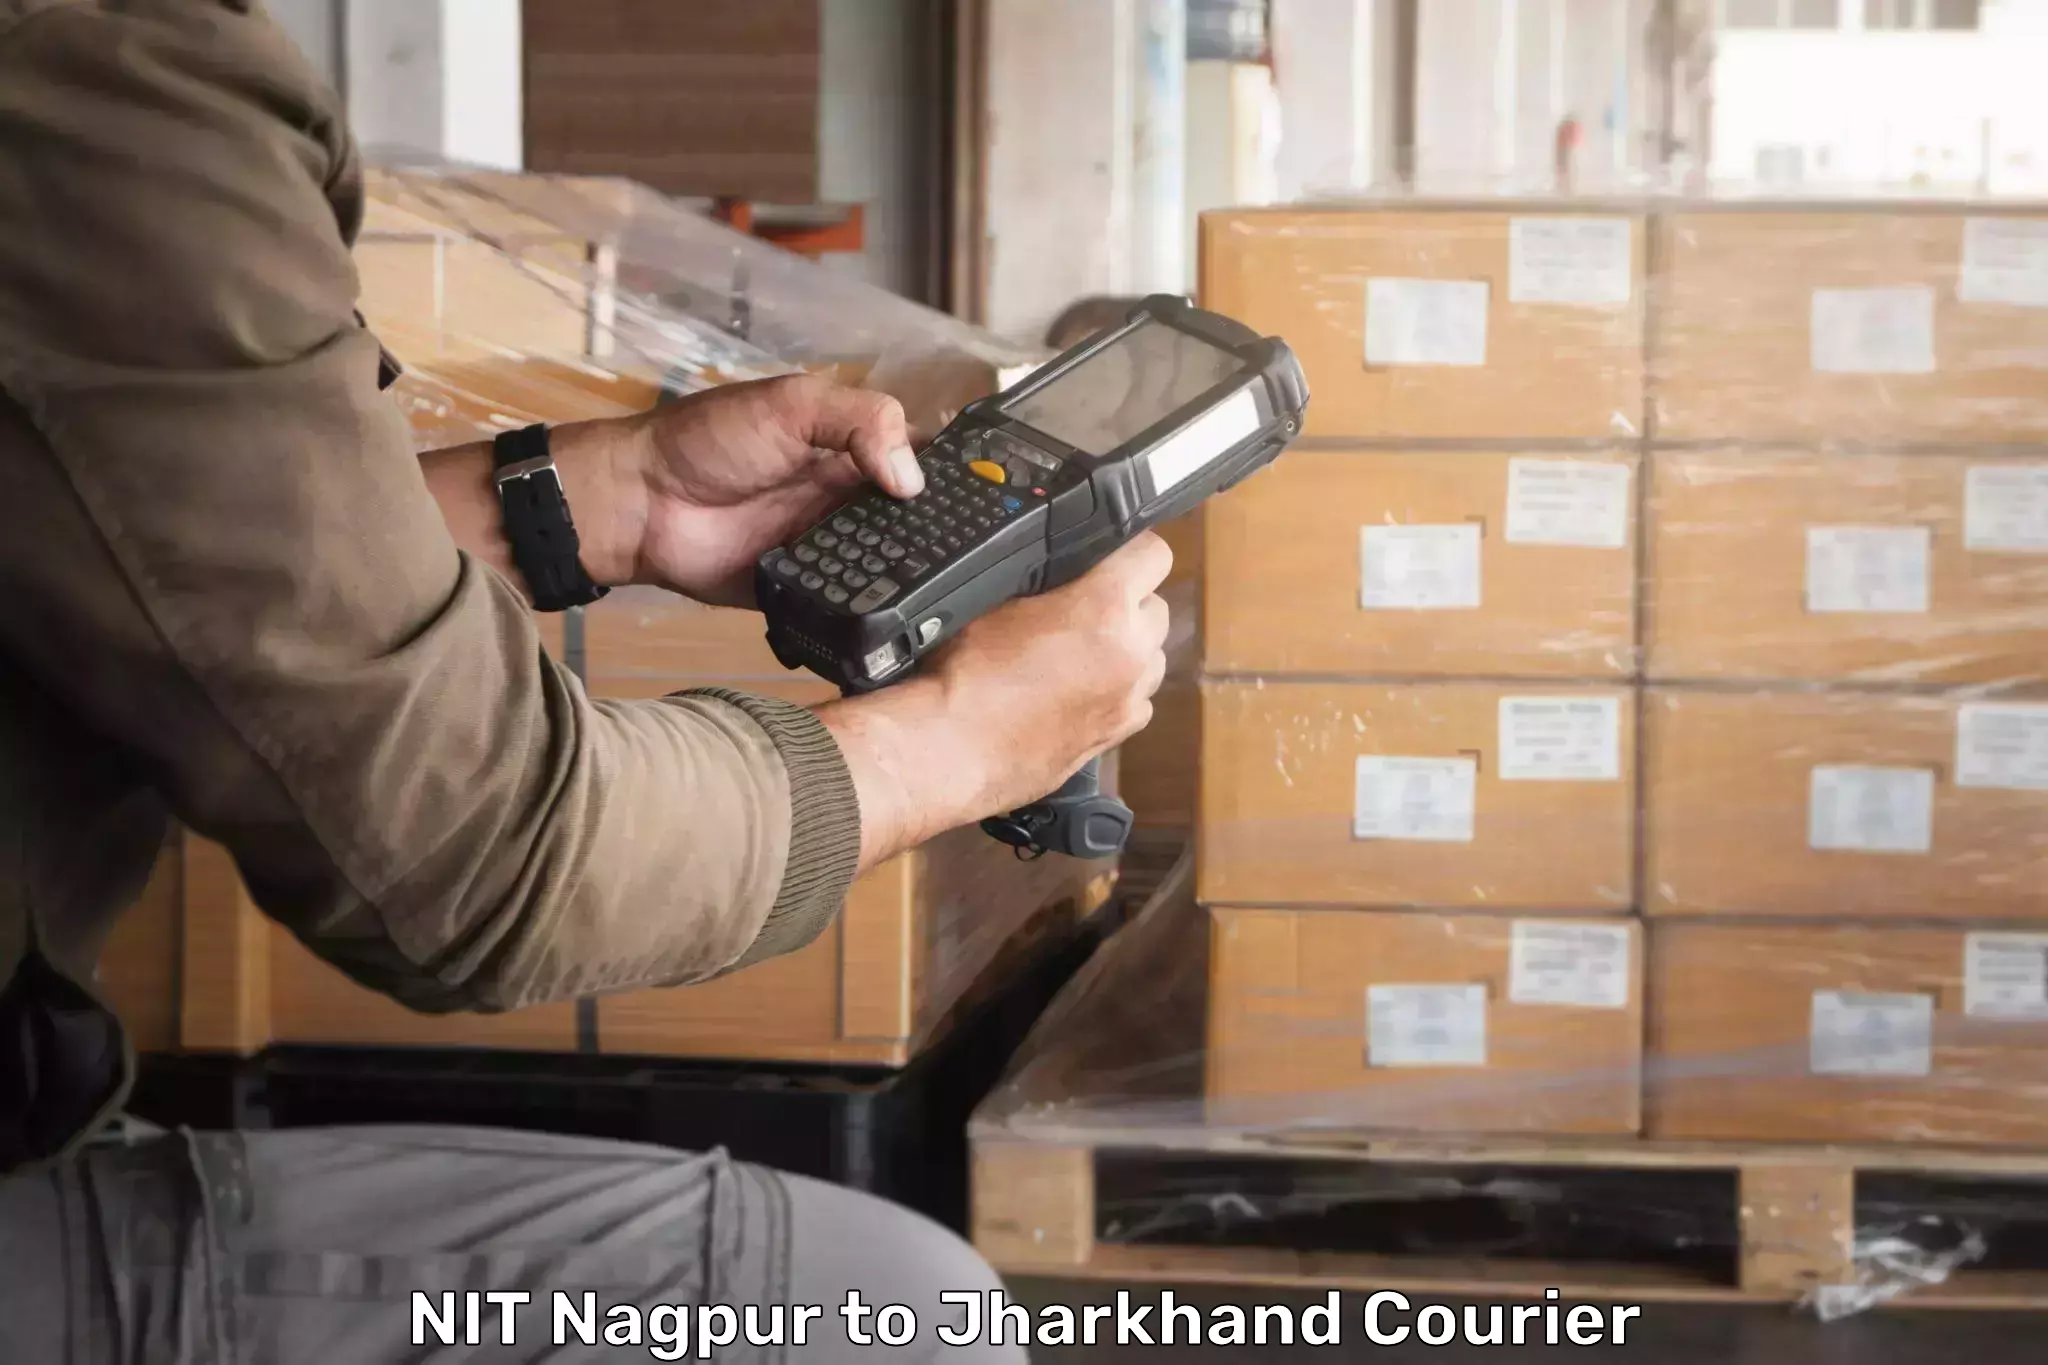 Personal parcel delivery in NIT Nagpur to Koderma